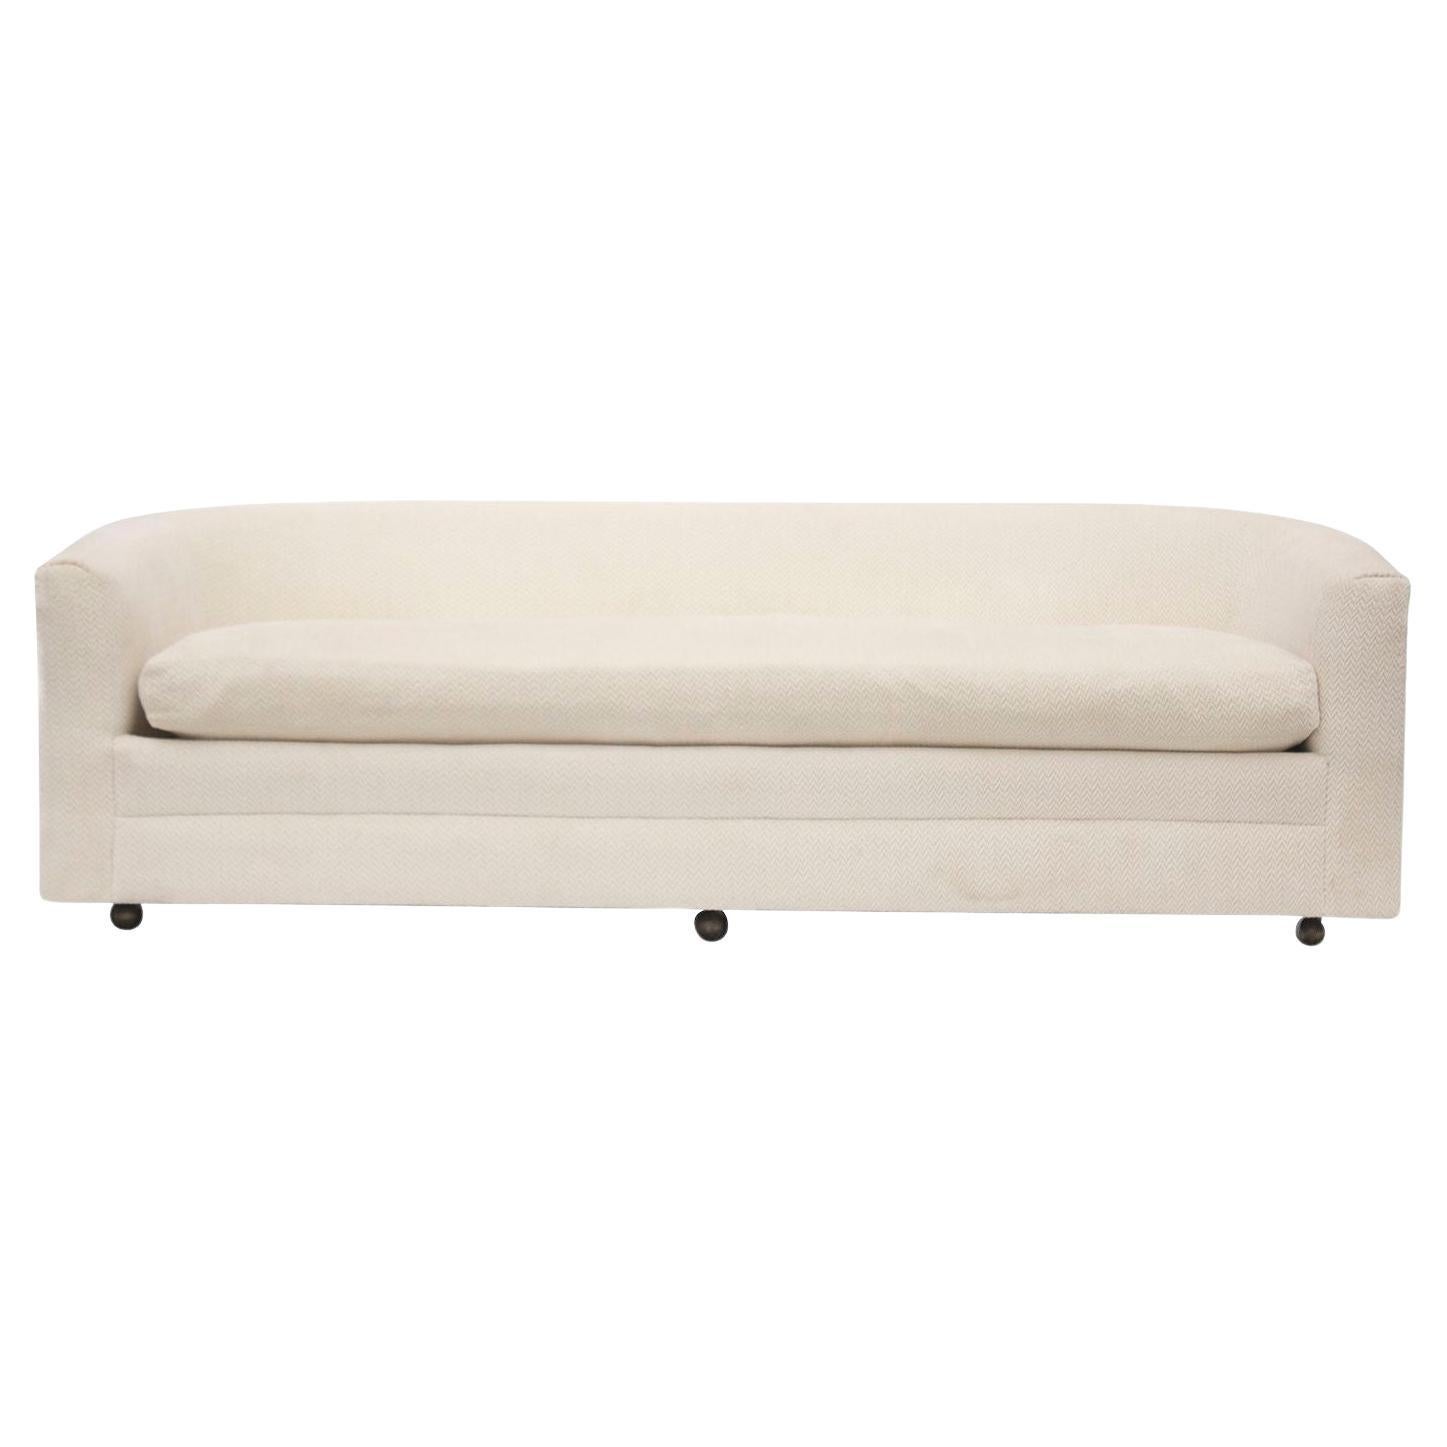 Custom Sofa on Casters in Cream Boucle #1 For Sale